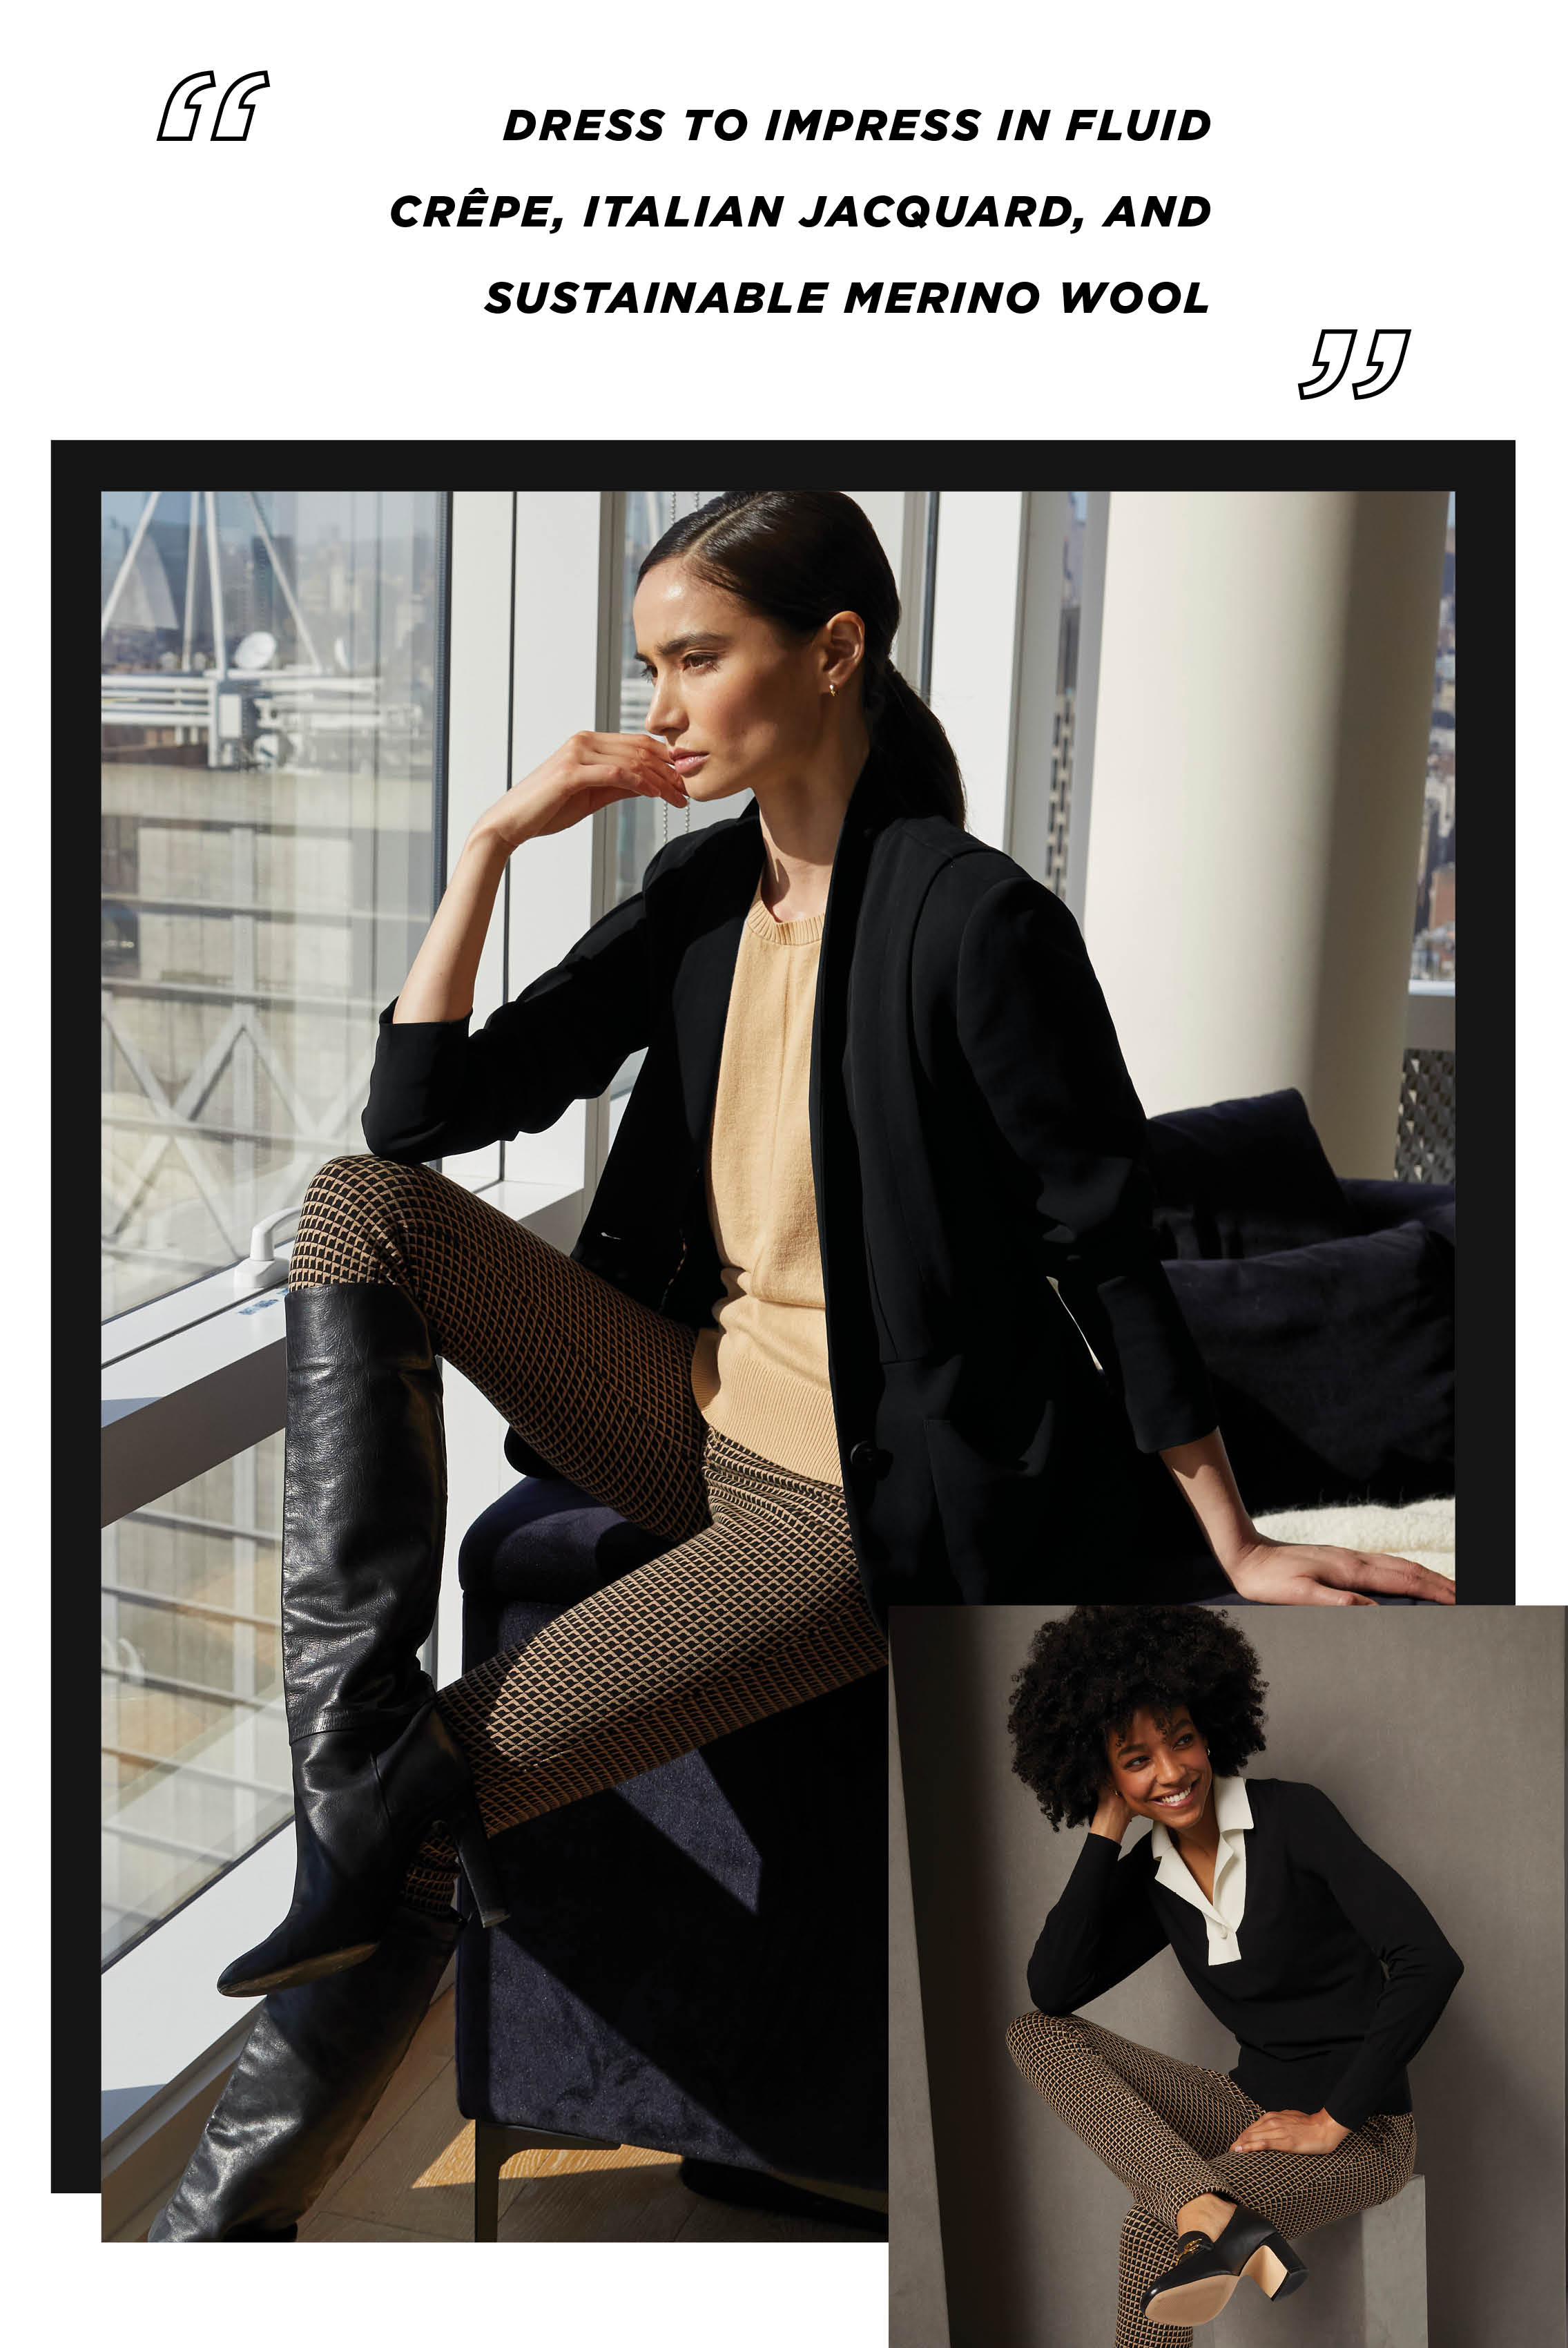 Raise your casual style status with this sleek and polished look, highlighting a black crêpe jacket with uniquely elegant tailoring. Pair it with a cozy merino-blend knit shell in camello beige for added comfort and style. 